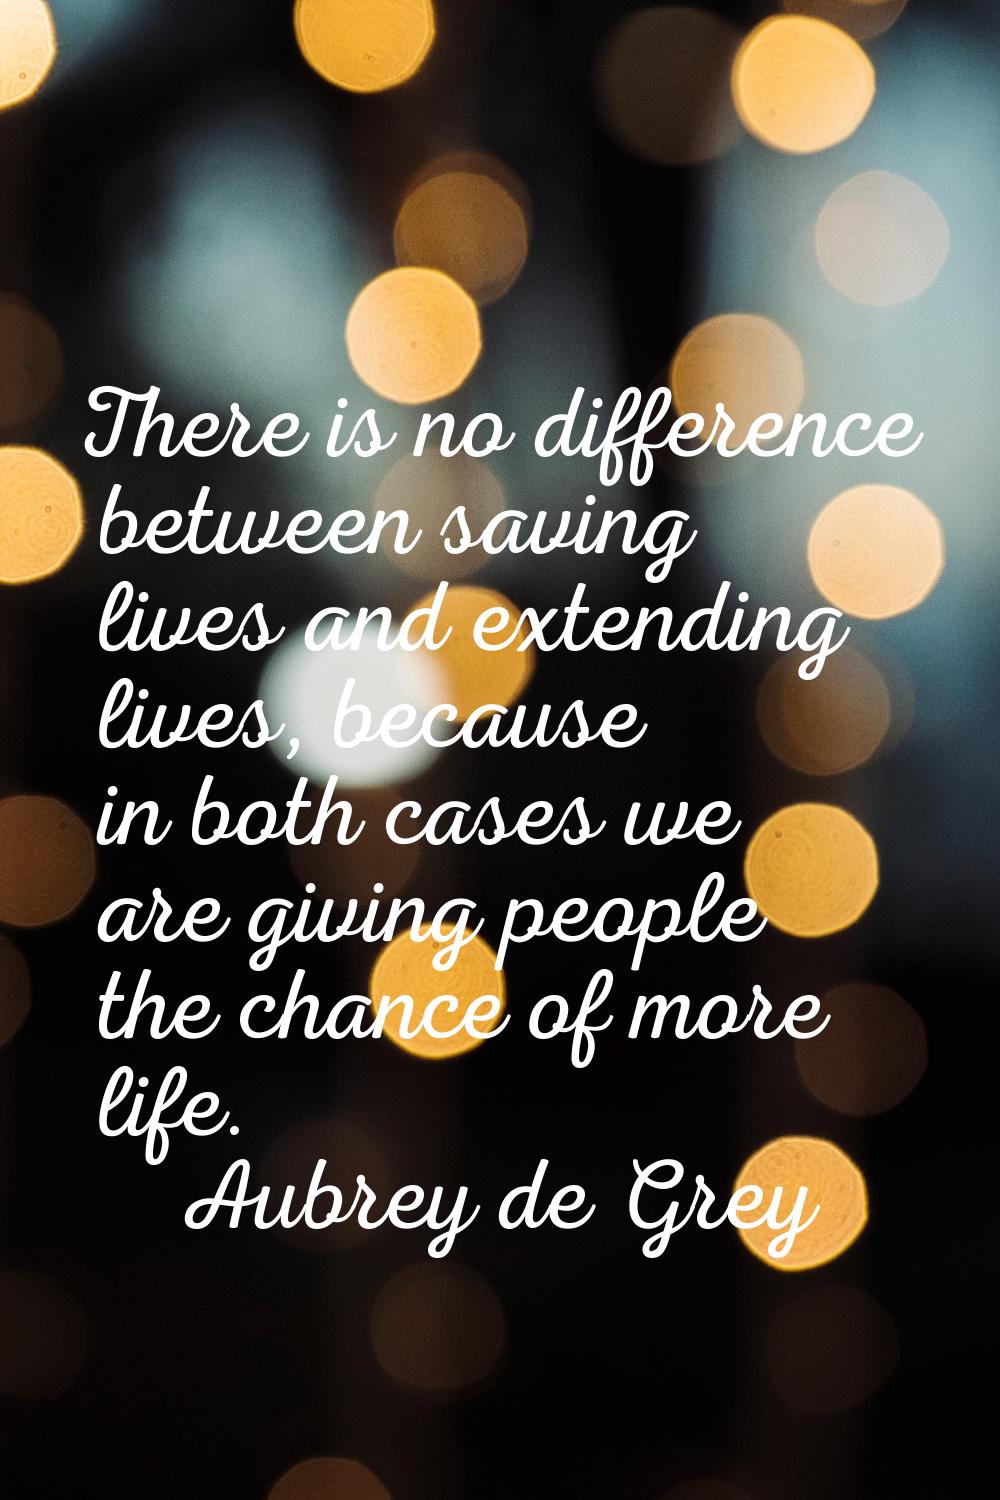 There is no difference between saving lives and extending lives, because in both cases we are givin